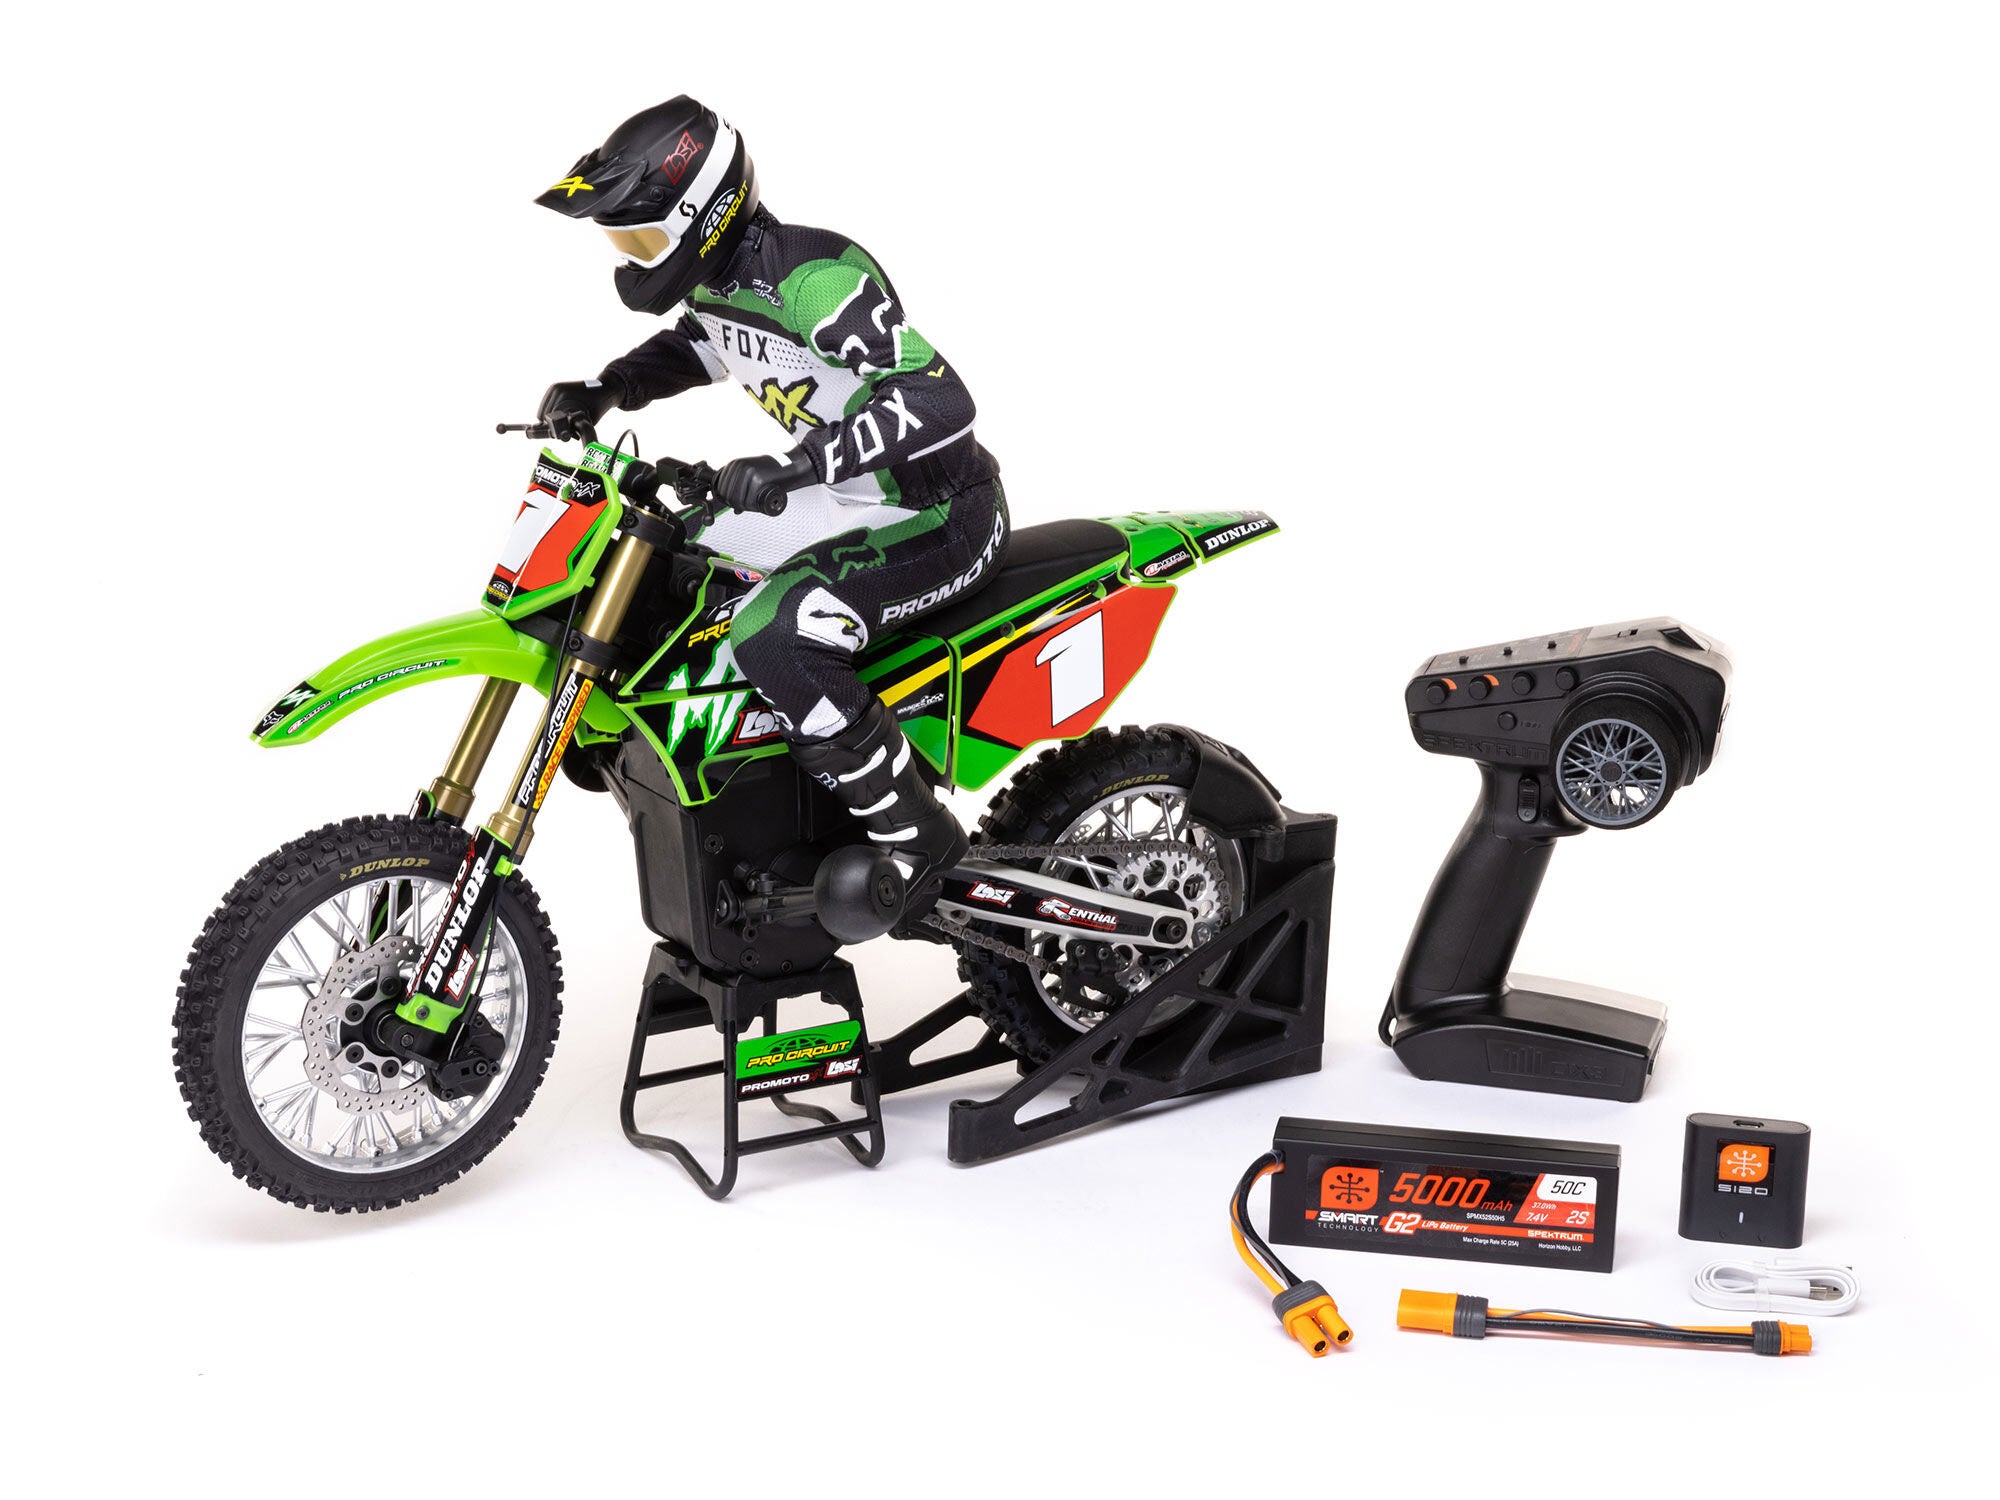 1/4 scale Promoto-MX Motorcycle RTR model with battery and charger included, detailed design